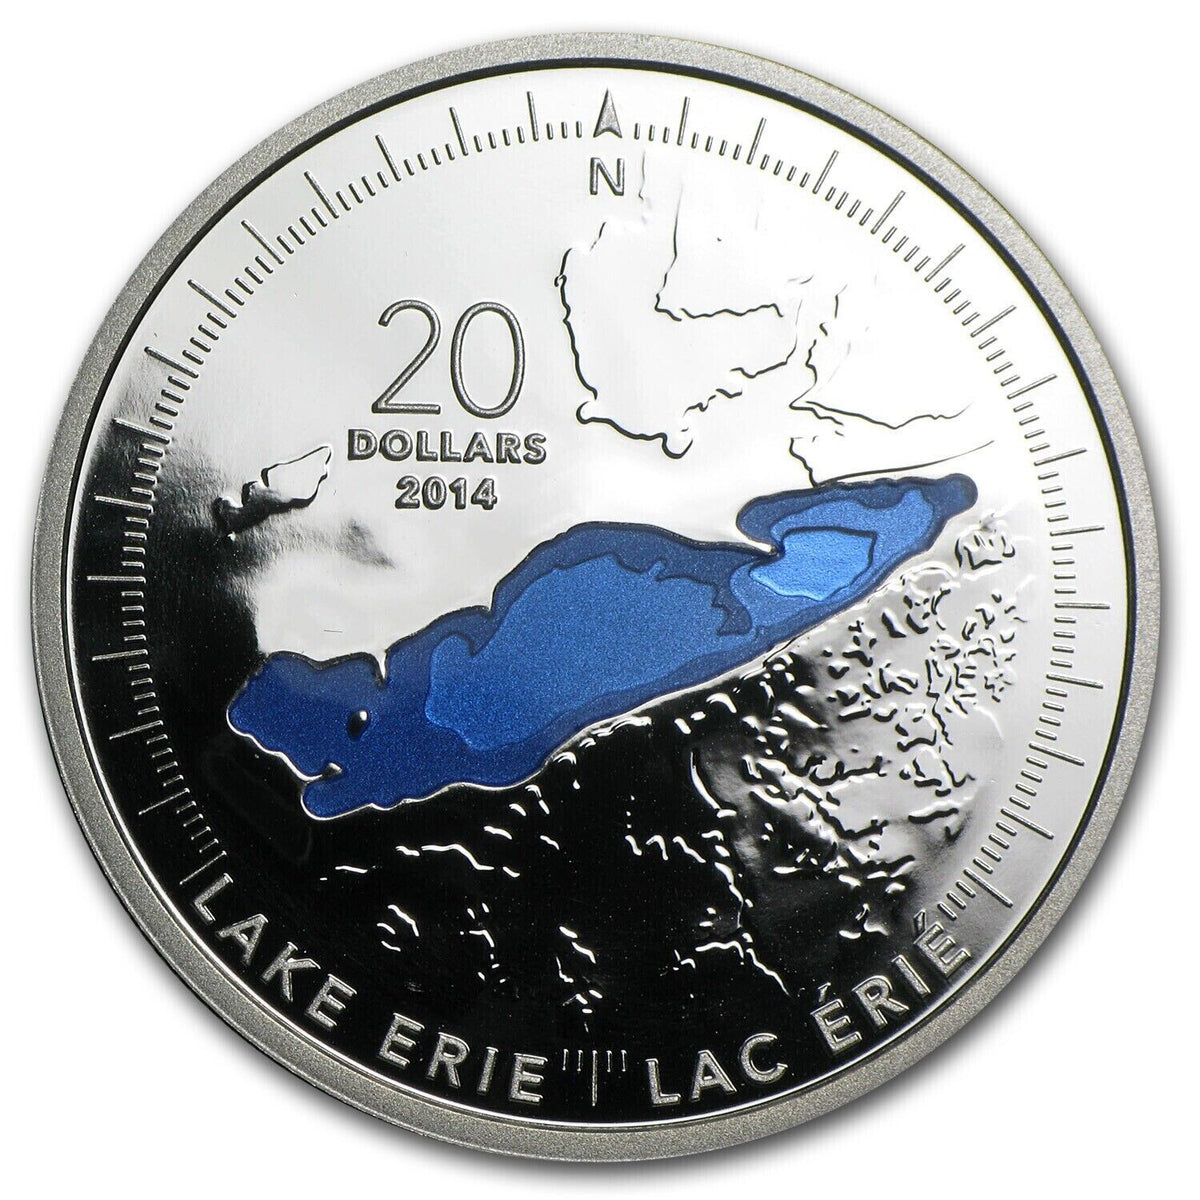 1 oz Silver Coin 2014 Canada $20 Color Proof RCM The Great Lakes: Lake Erie-classypw.com-1